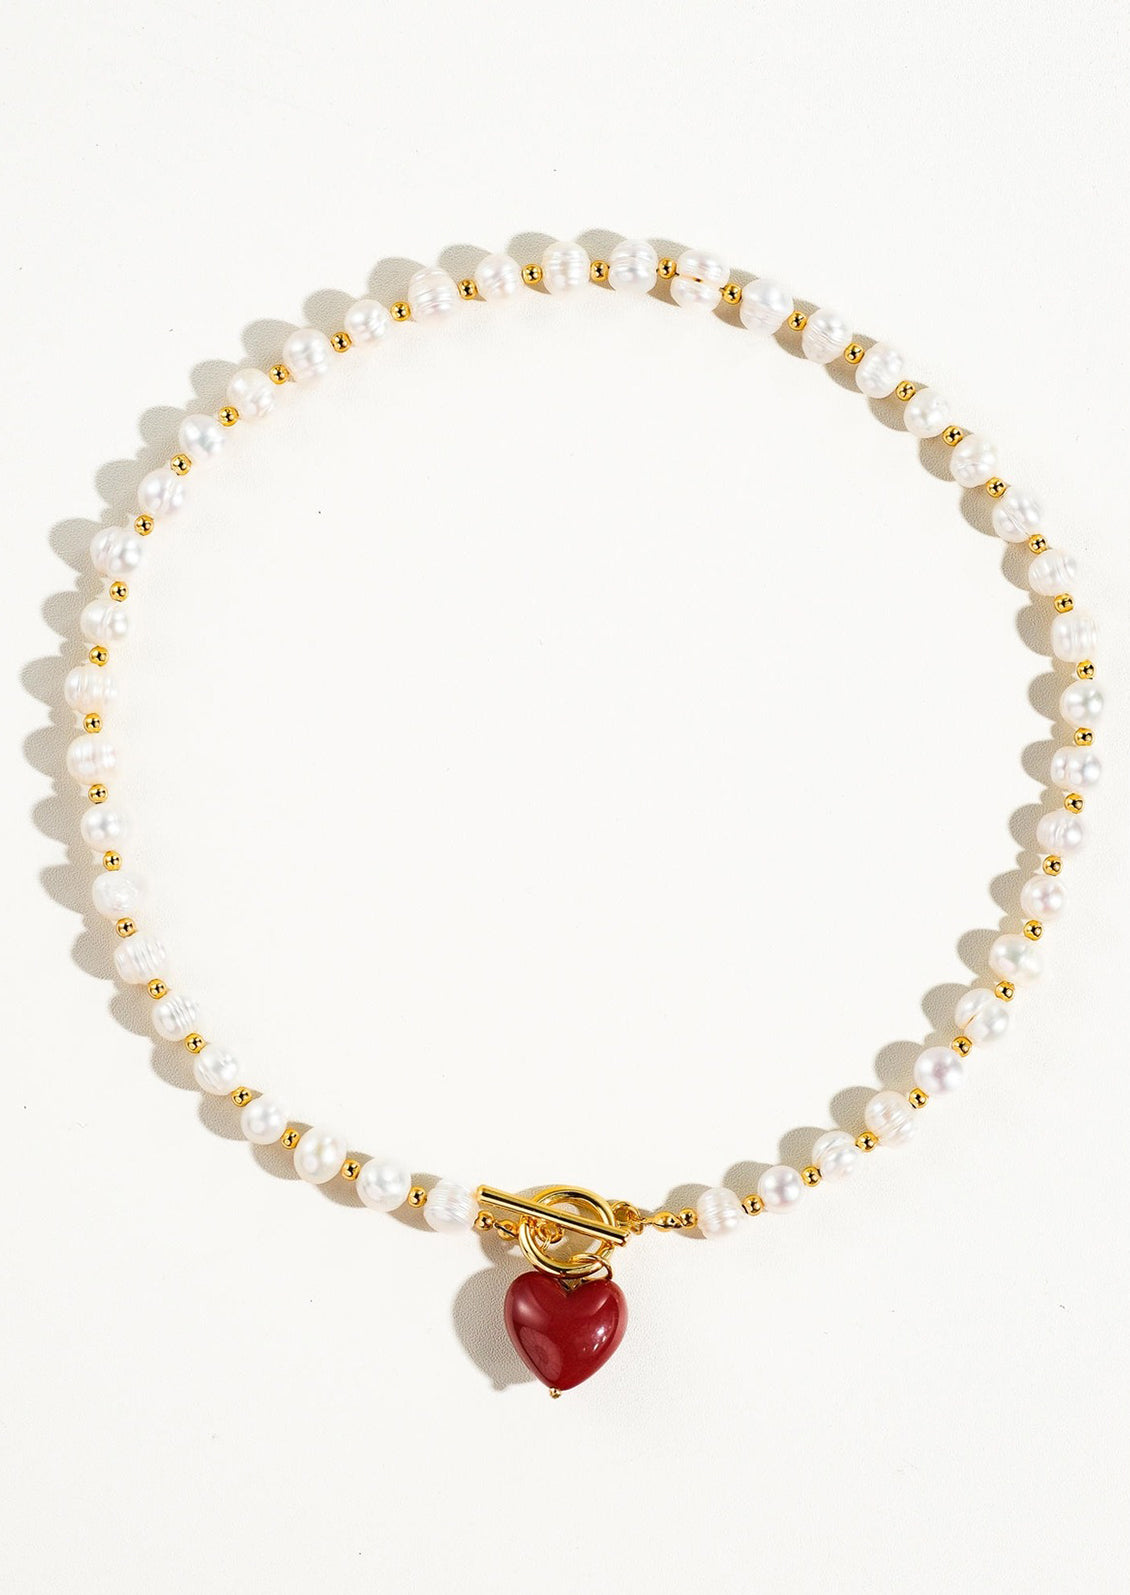 A necklace with alternating gold and pearl beads and red heart toggle clasp.